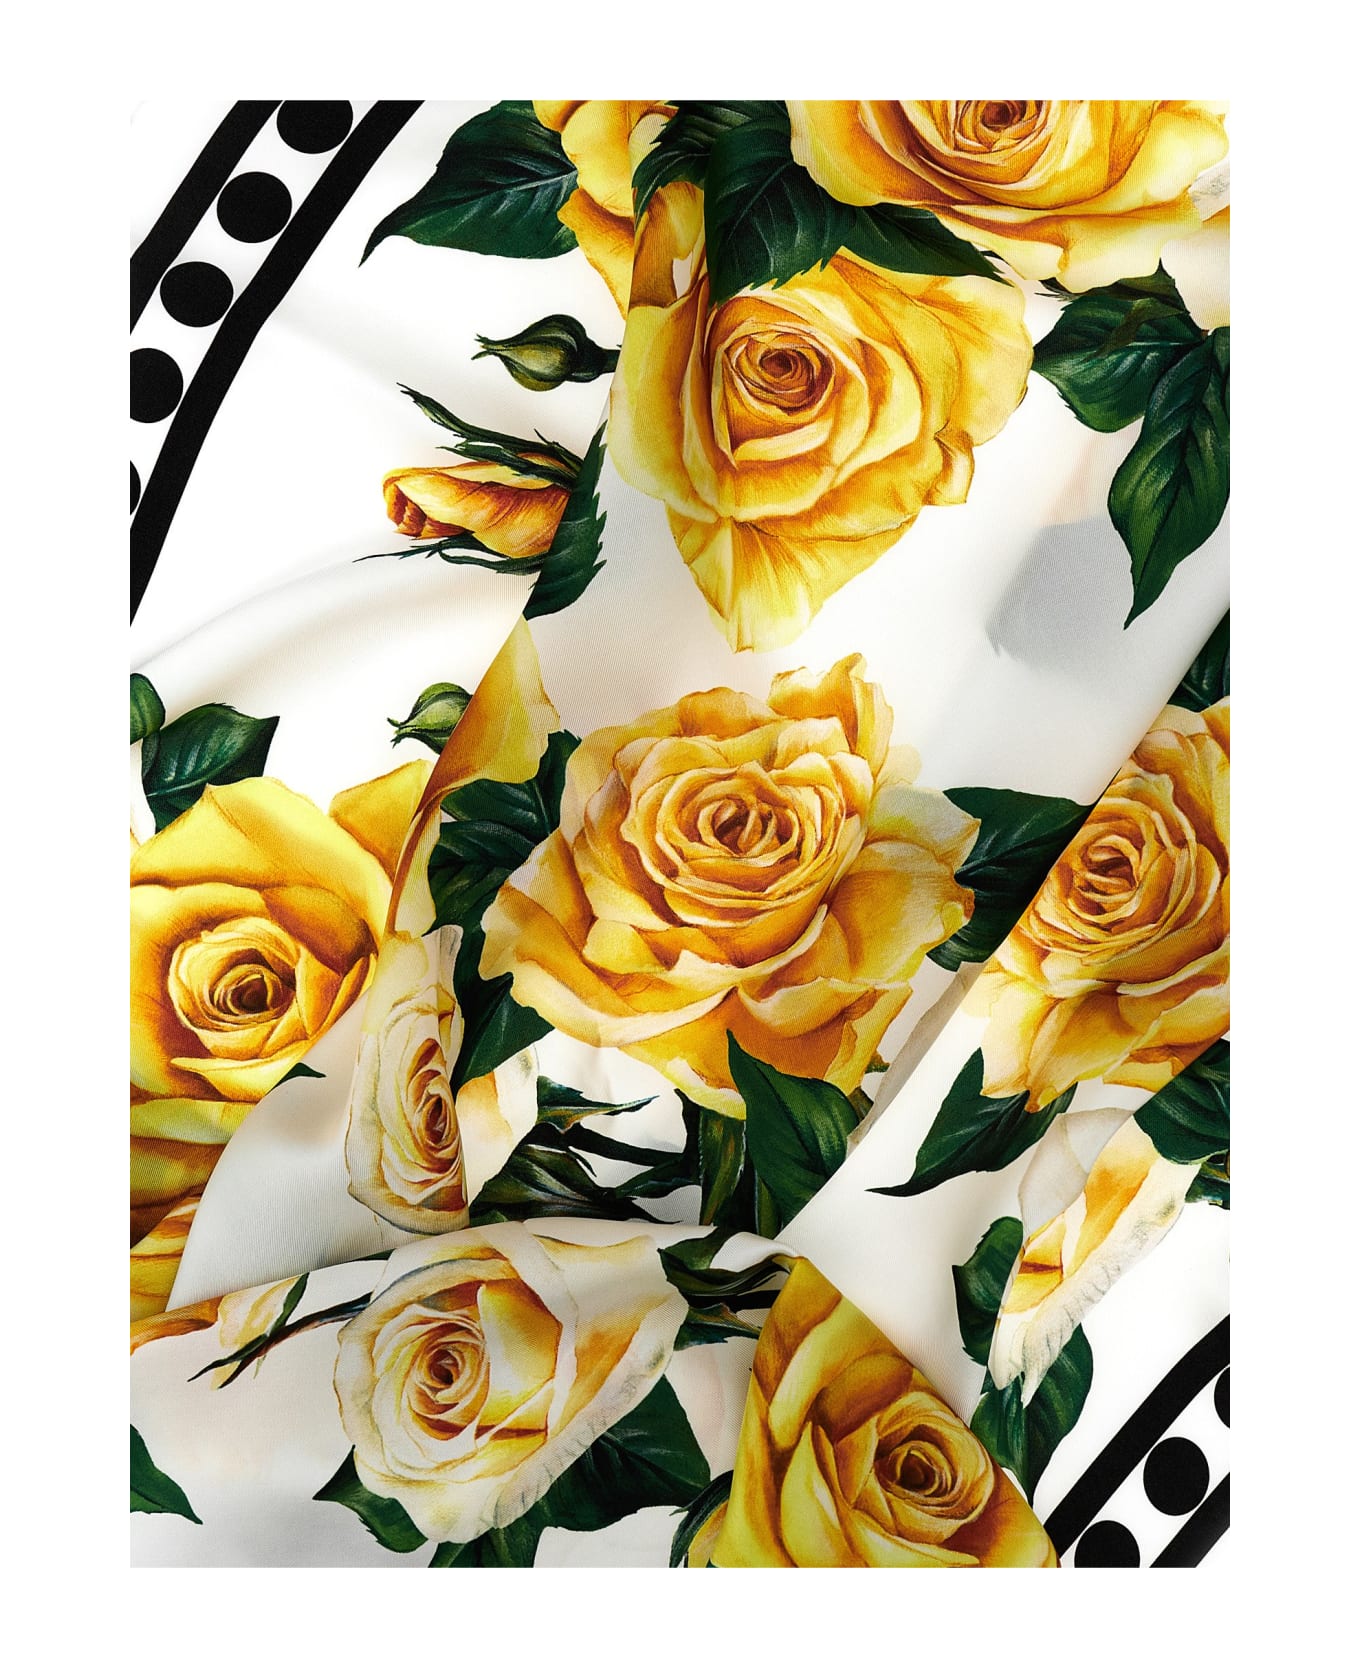 Dolce Roll & Gabbana 'rose Gialle' Scarf - Multicolor